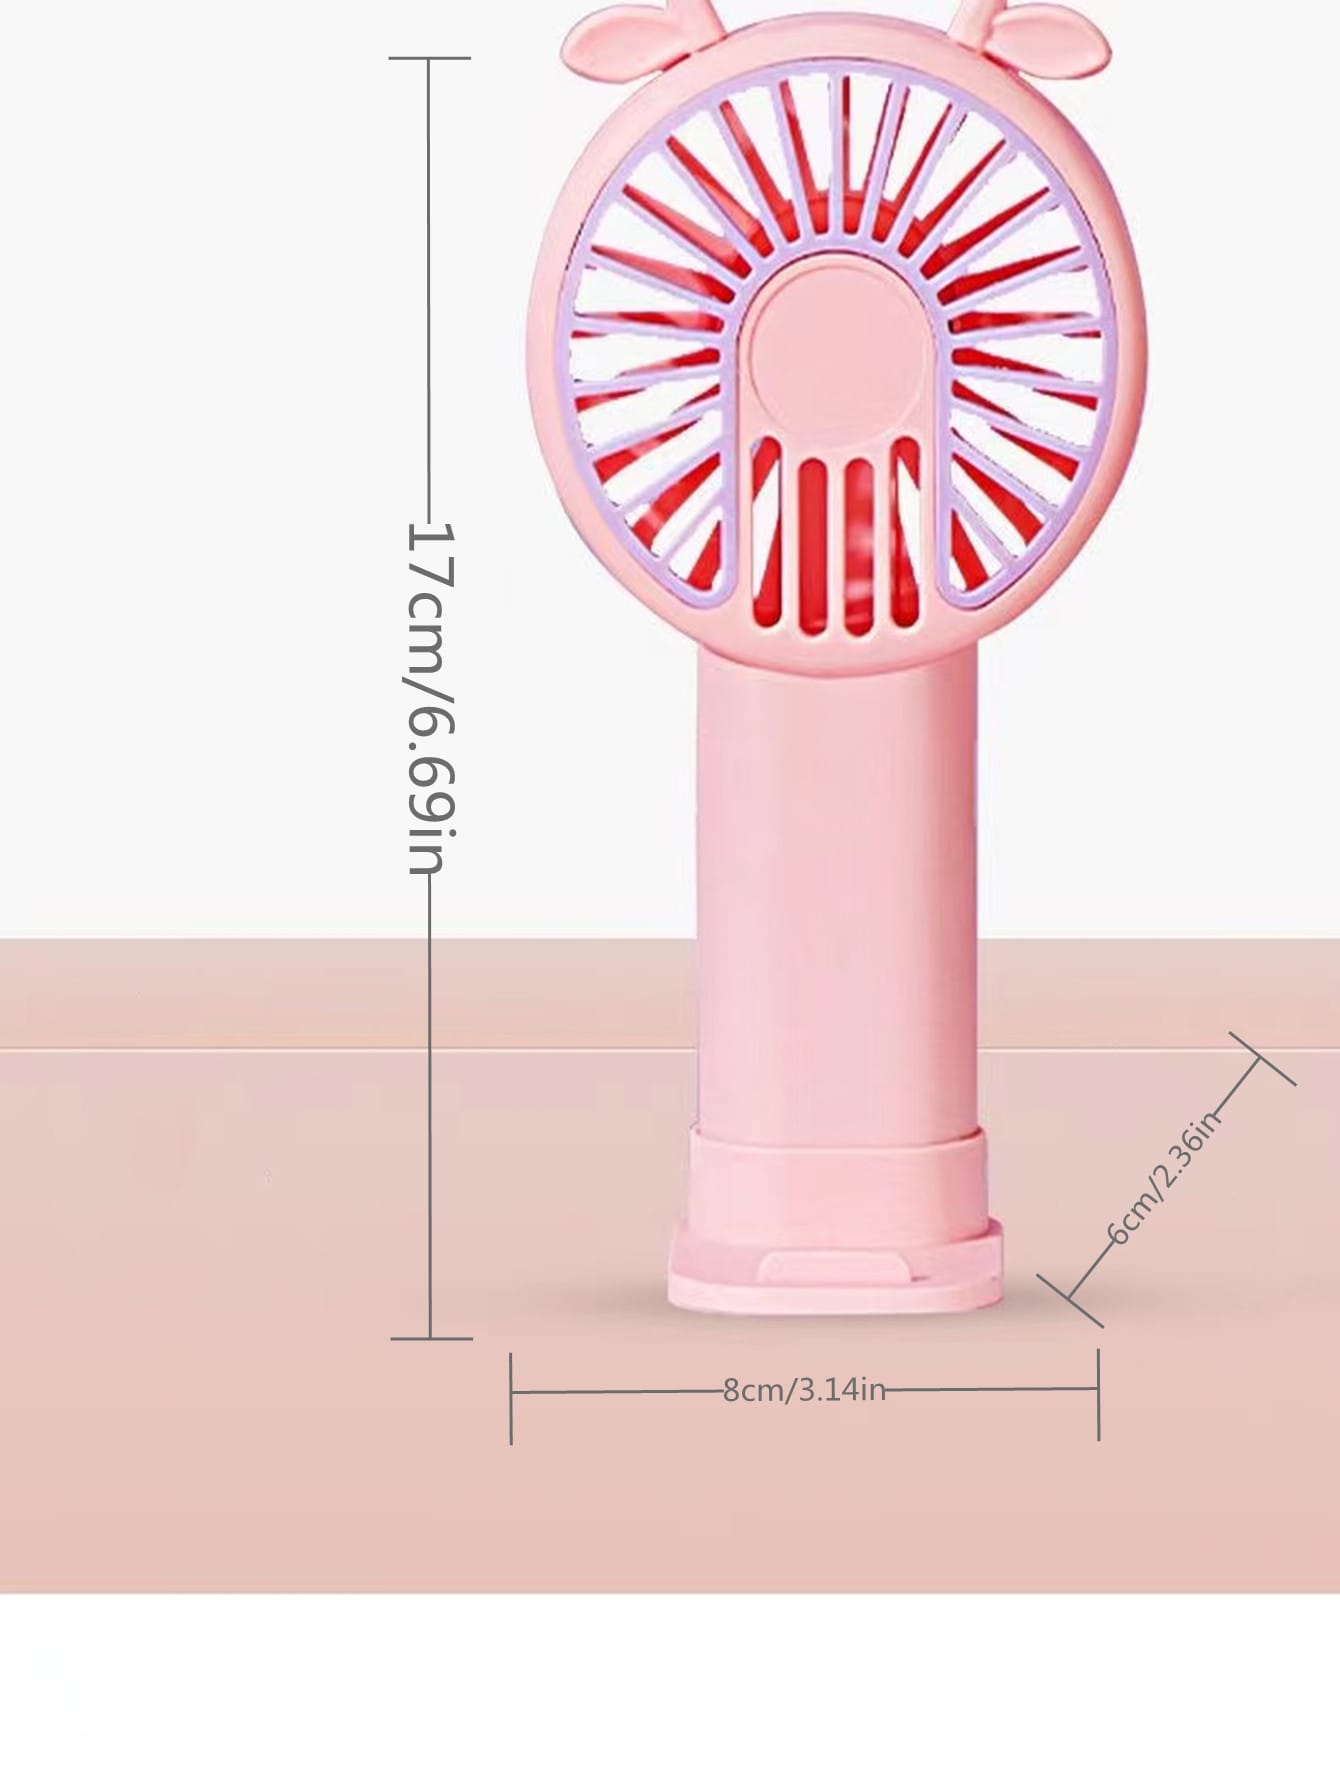 Portable Handheld Electric Fan With High Wind Power, Rechargeable, Suitable For Cars, School, Camping, And Manual Operation, Silent And Convenient.-Pink-3